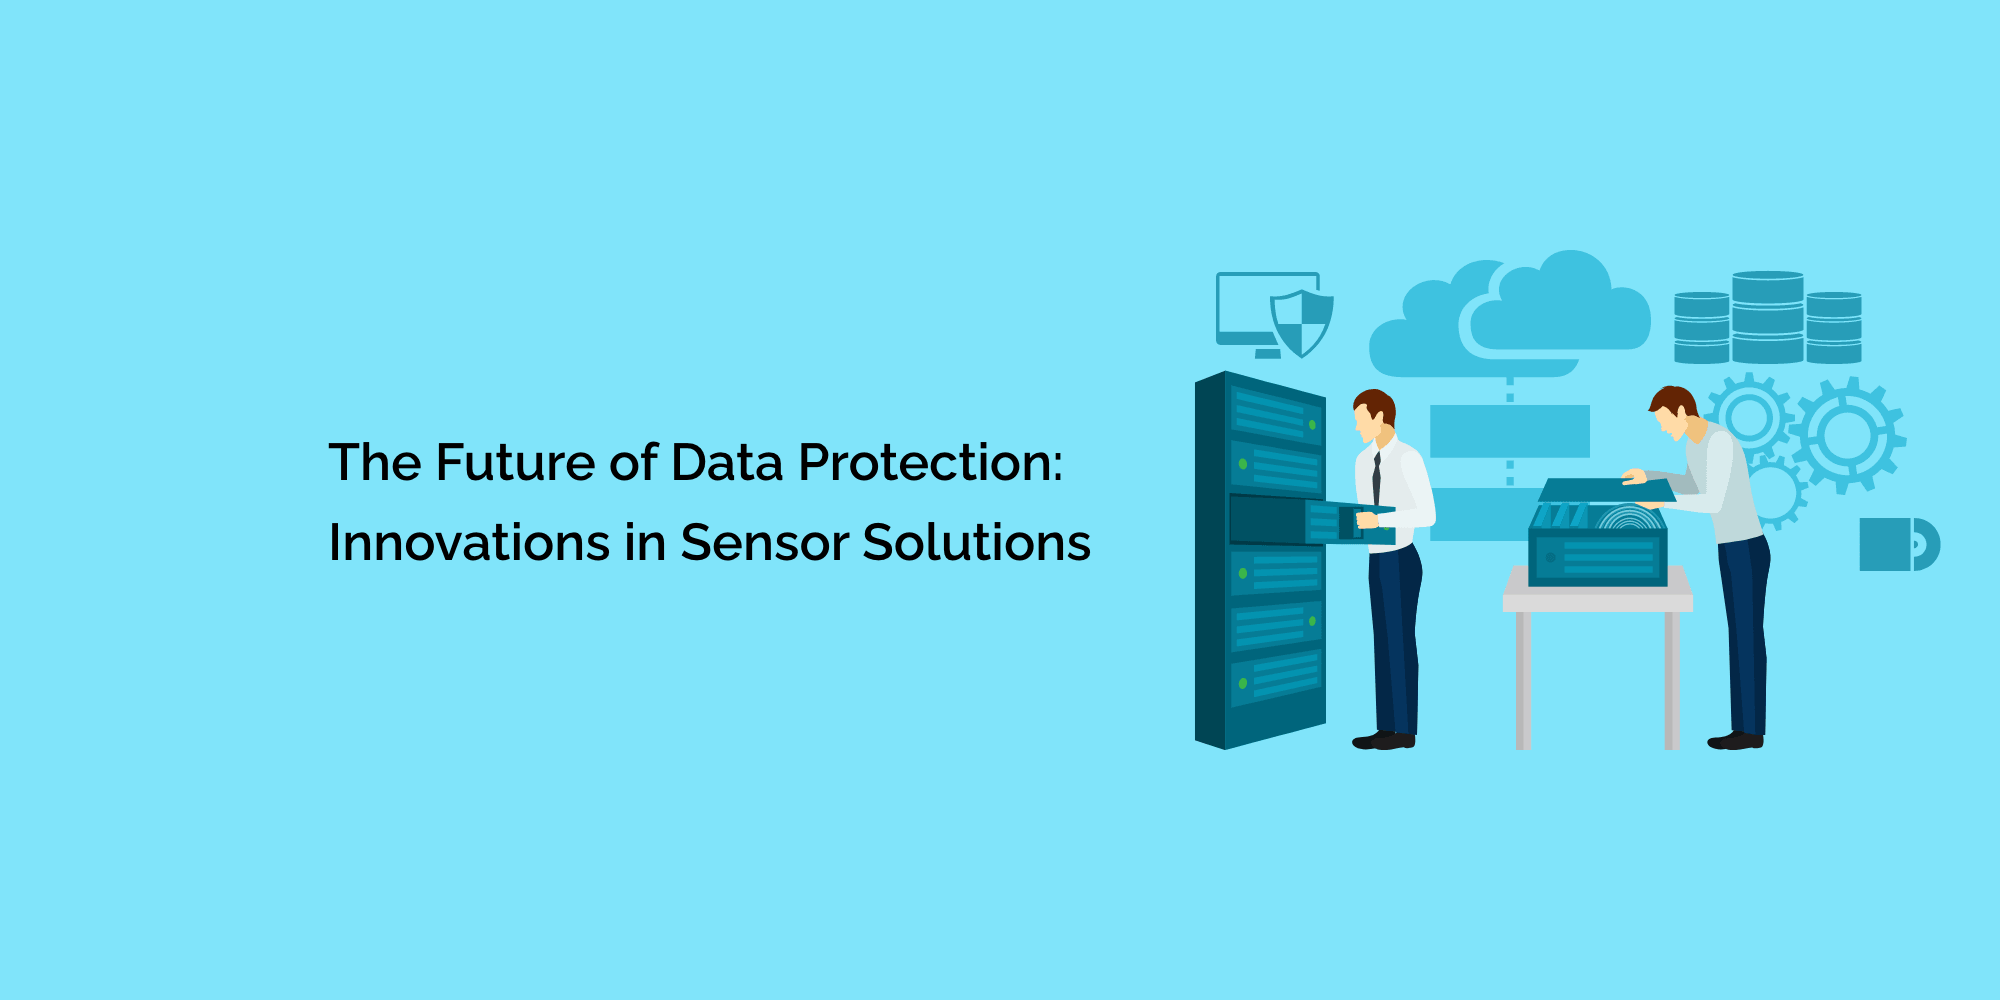 The Future of Data Protection: Innovations in Sensor Solutions